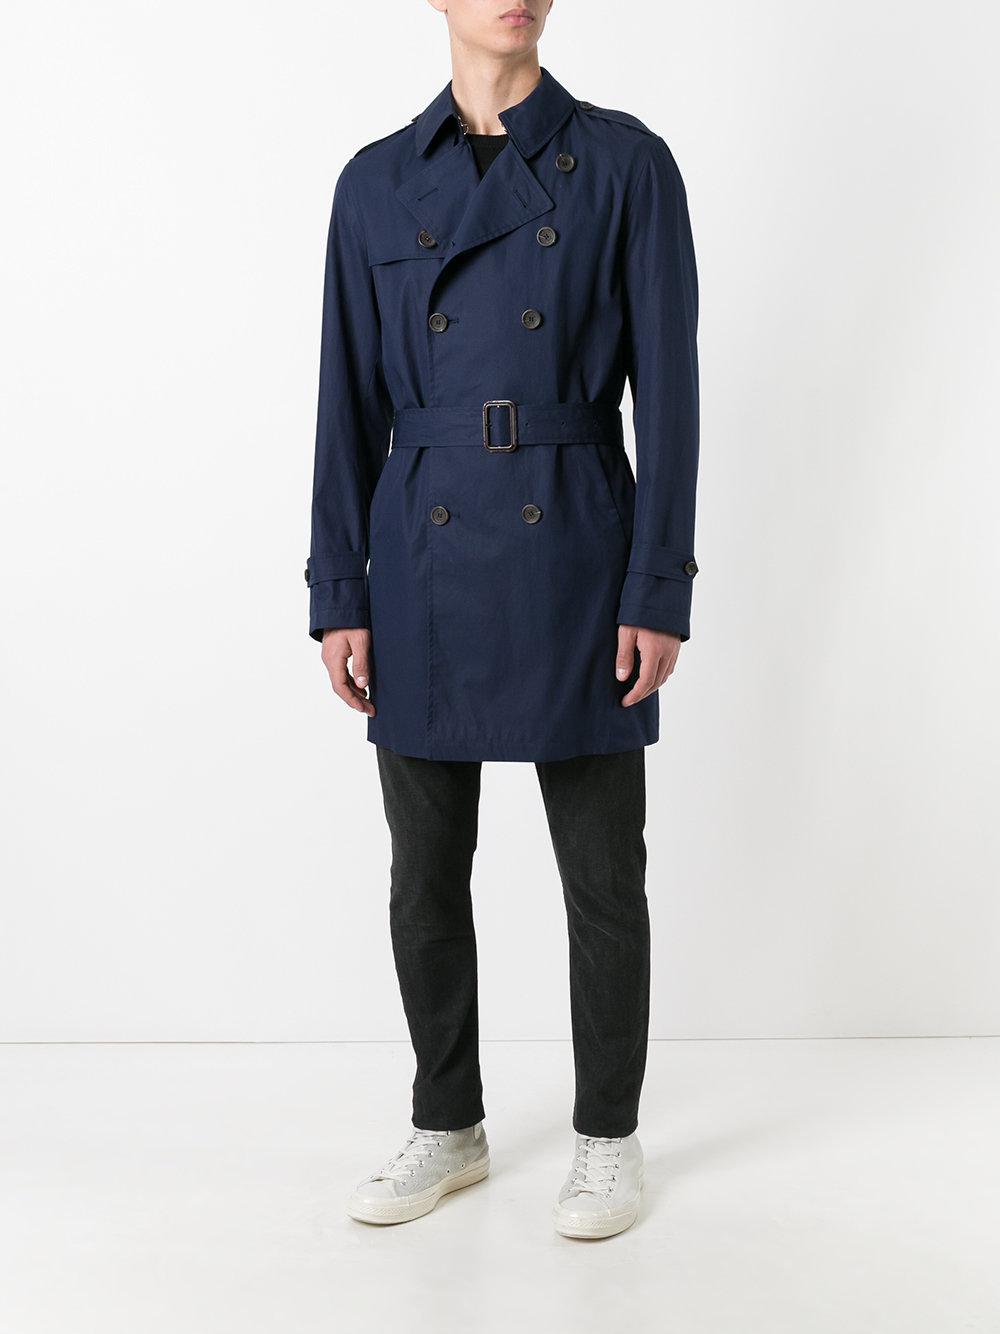 Sealup Cotton Belted Trench Coat in Blue for Men - Lyst